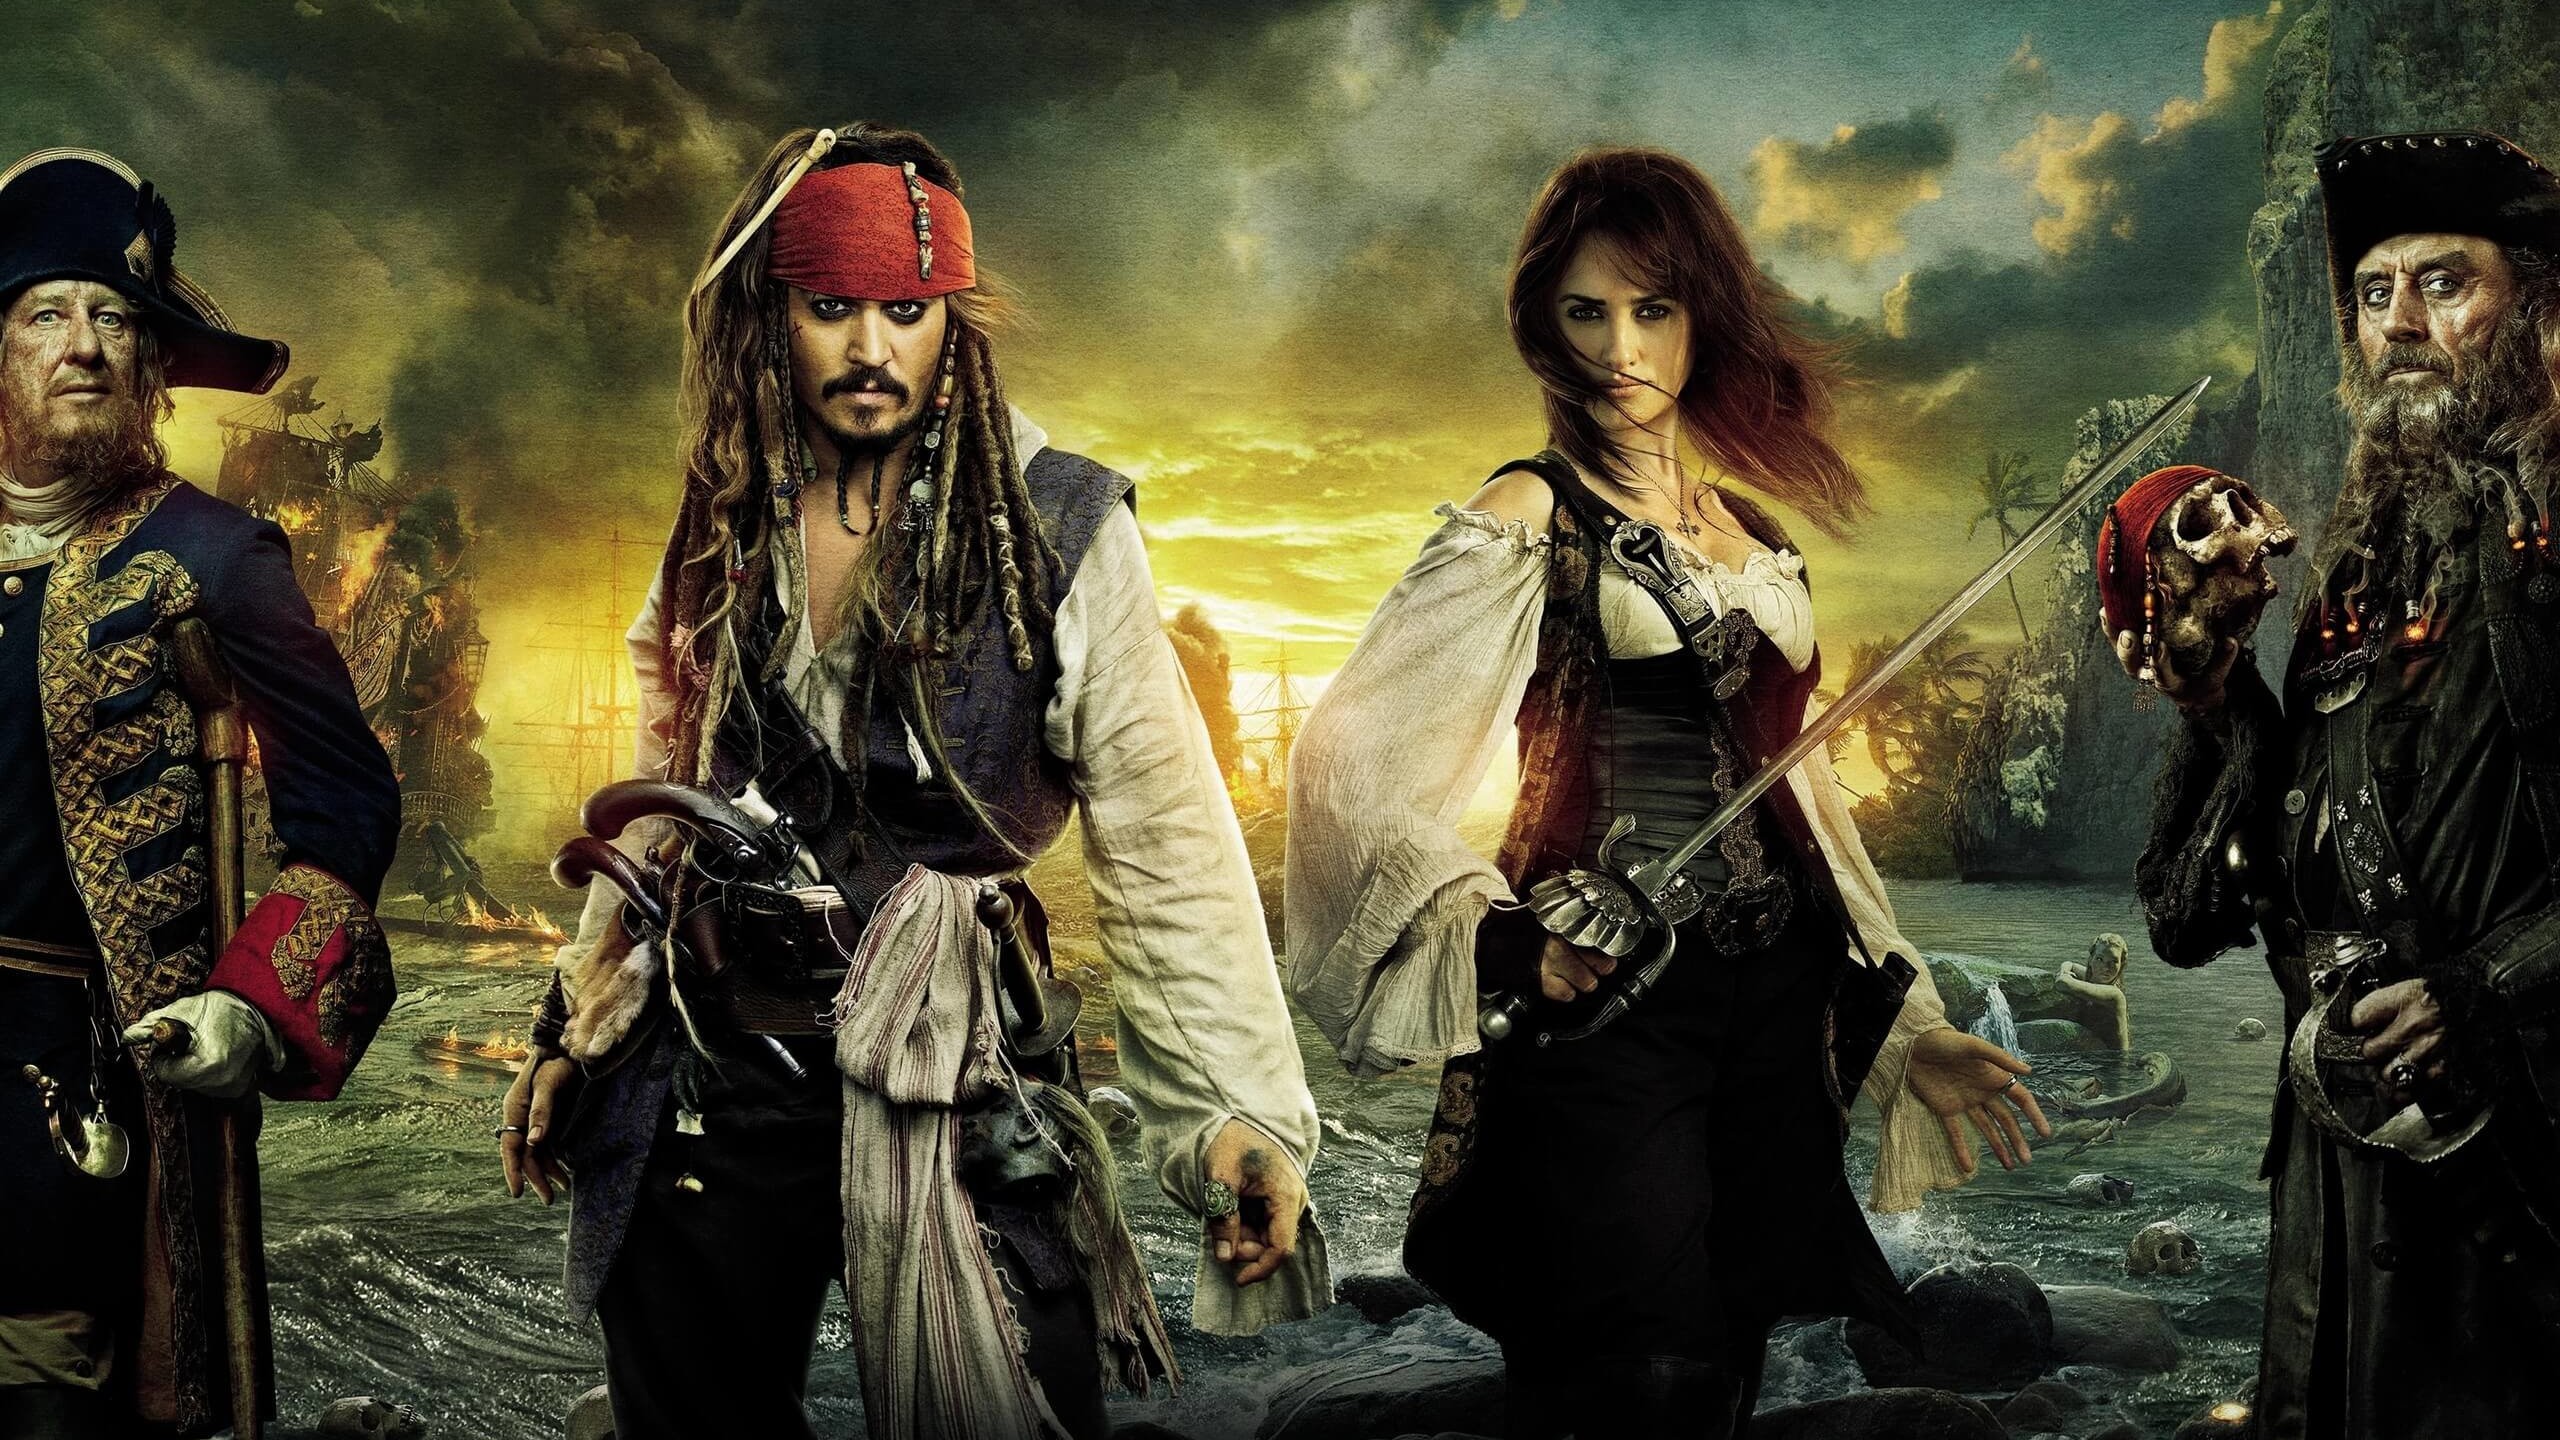 Pirates of the Caribbean: On Stranger Tides Characters Wallpaper for Social Media YouTube Channel Art